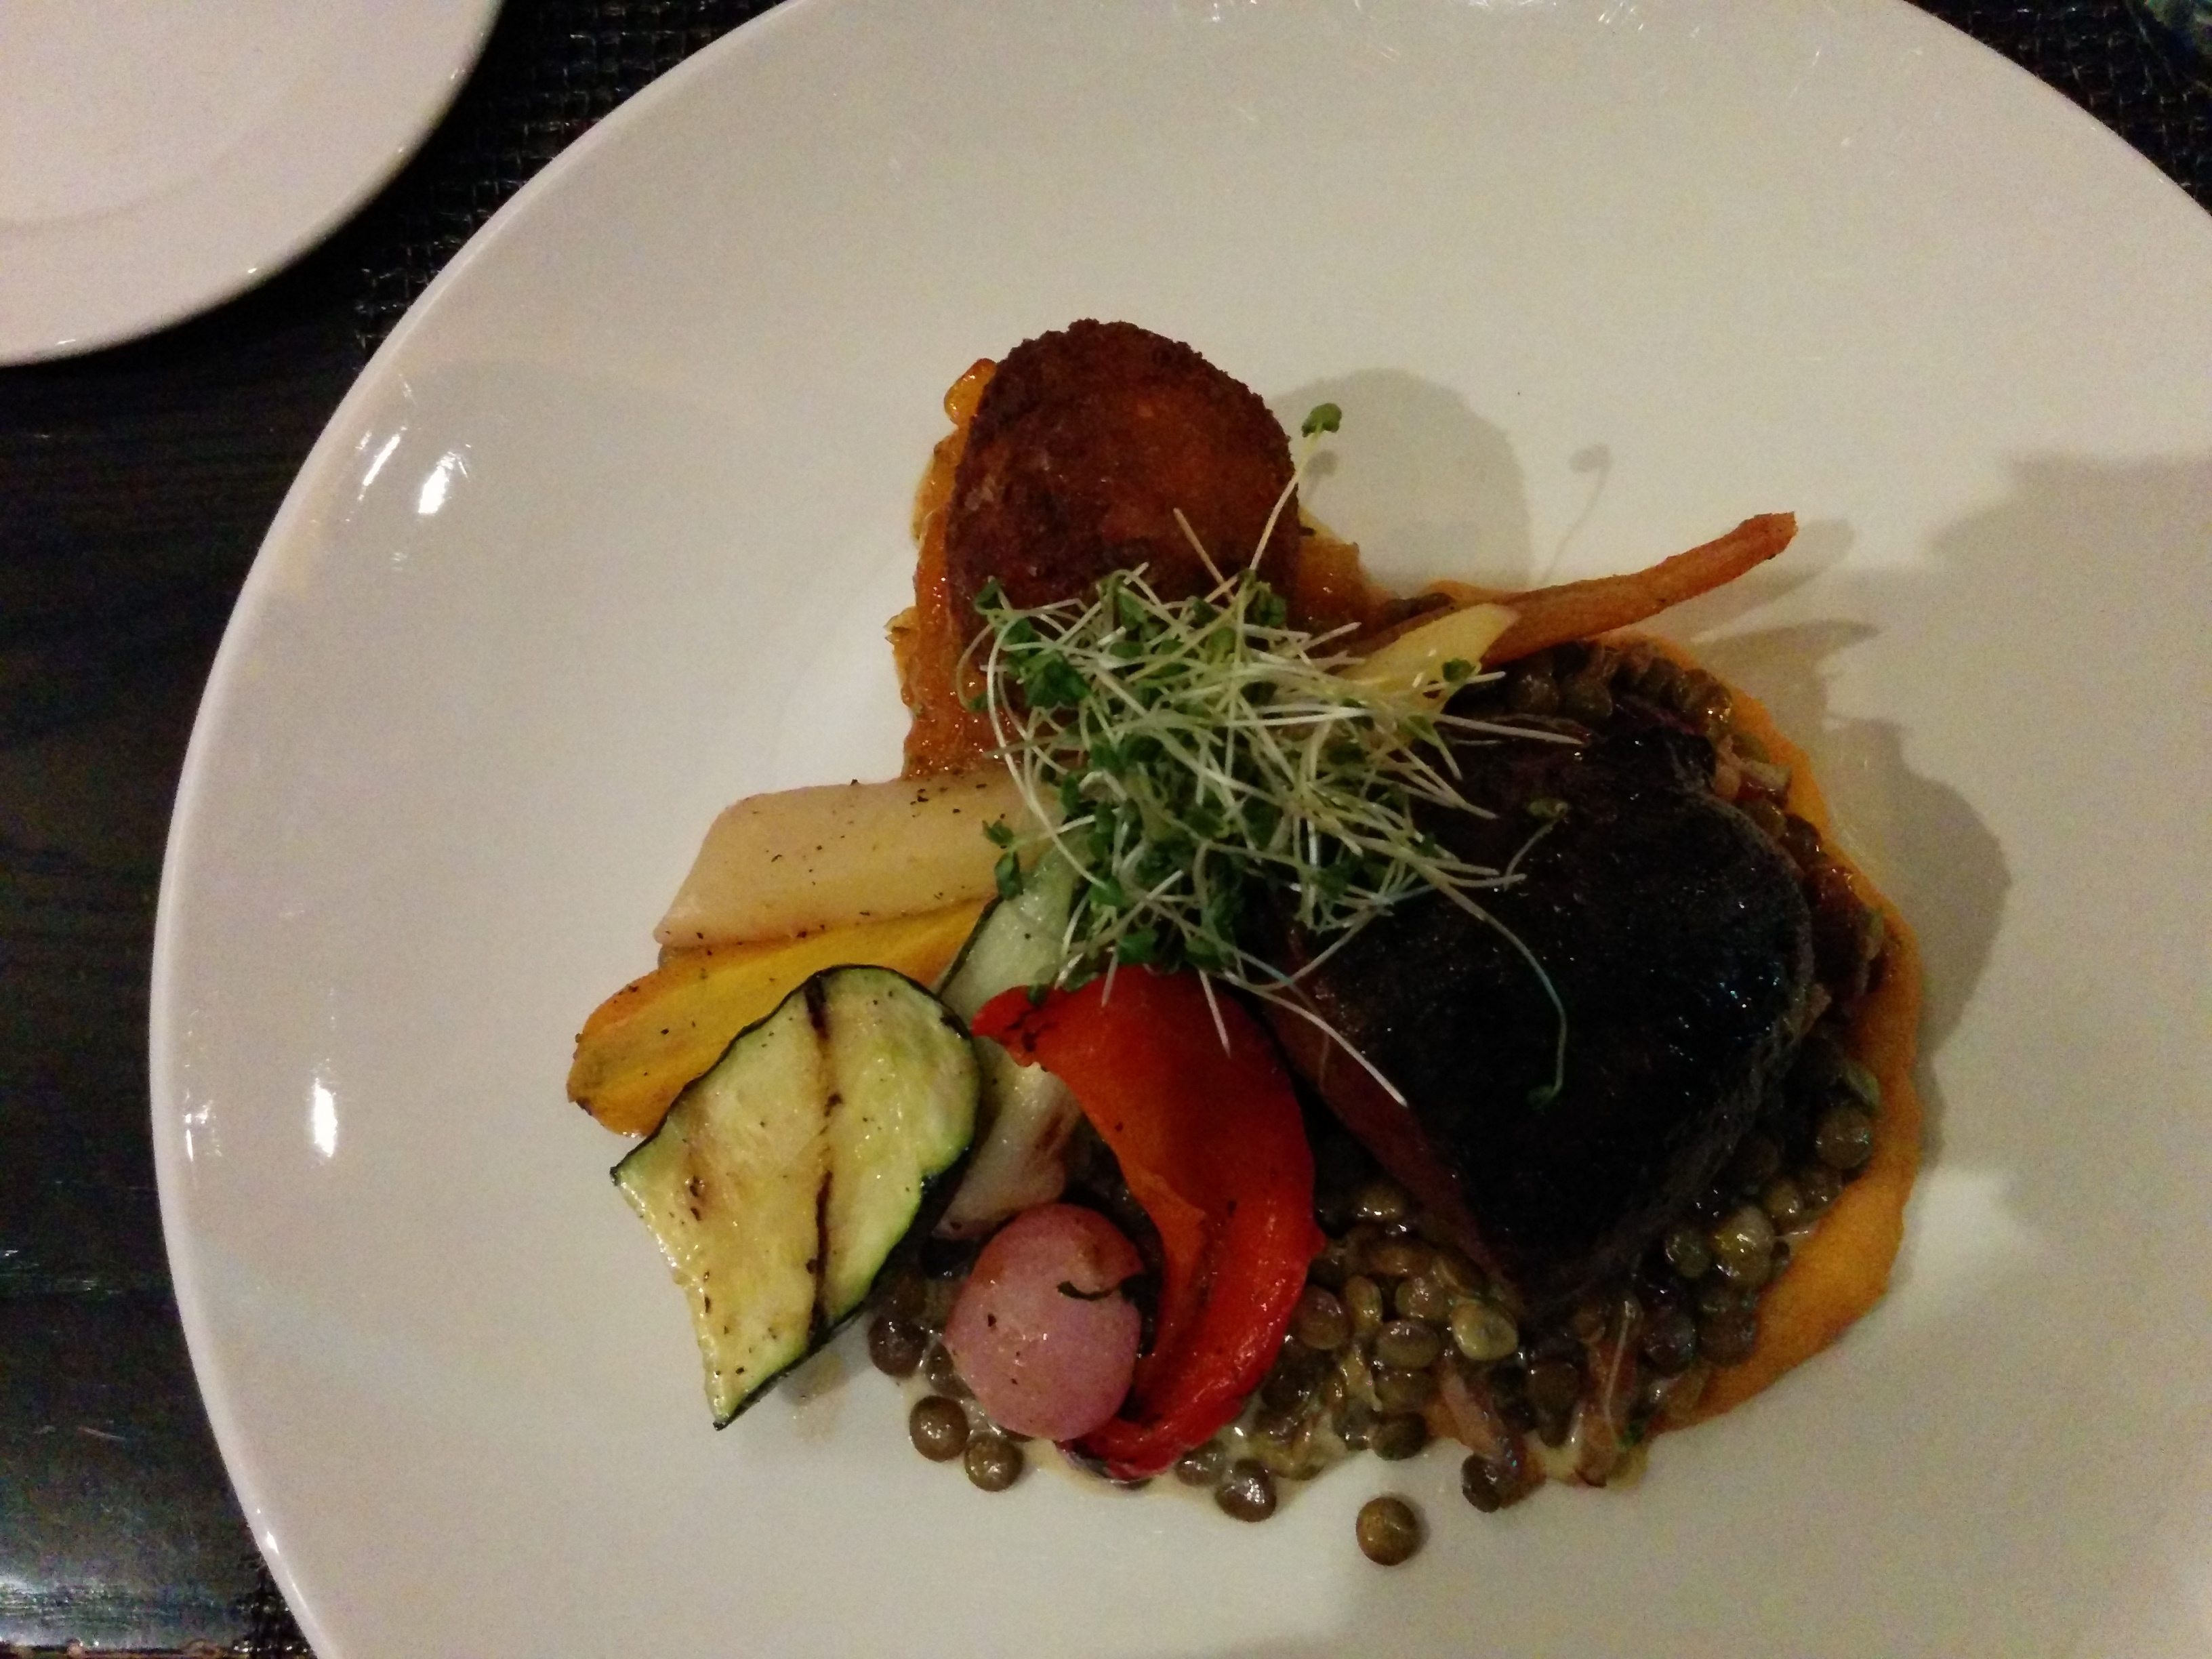 Hobbit Bistro: My type of French food